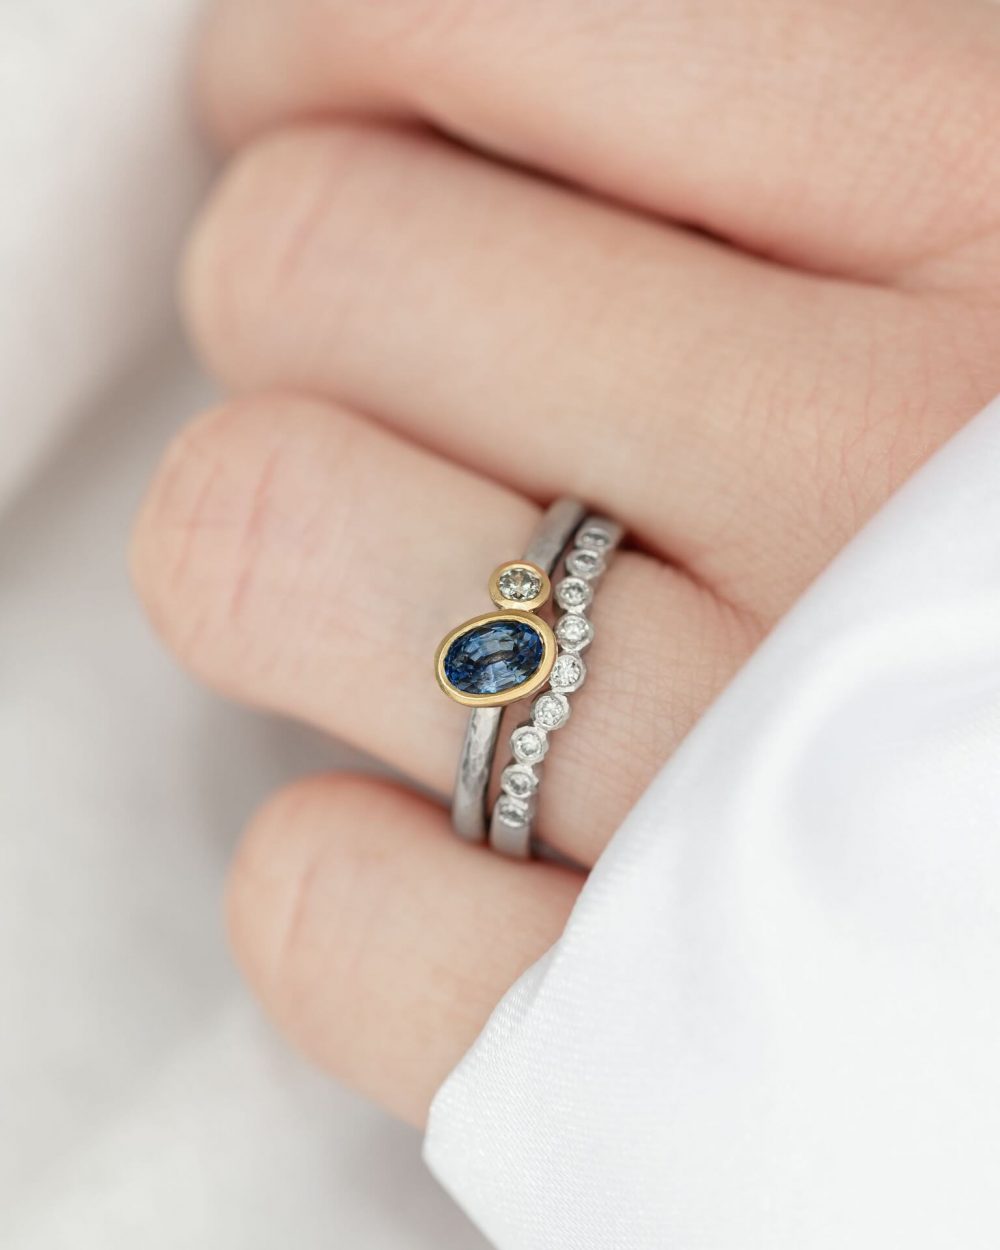 Oval Sapphire Diamond Alternative Engagement Ring Worn With A Curved Salt And Pepper Diamond Ring. Pictured On Model By Bristol Jeweller Jacks Turner.